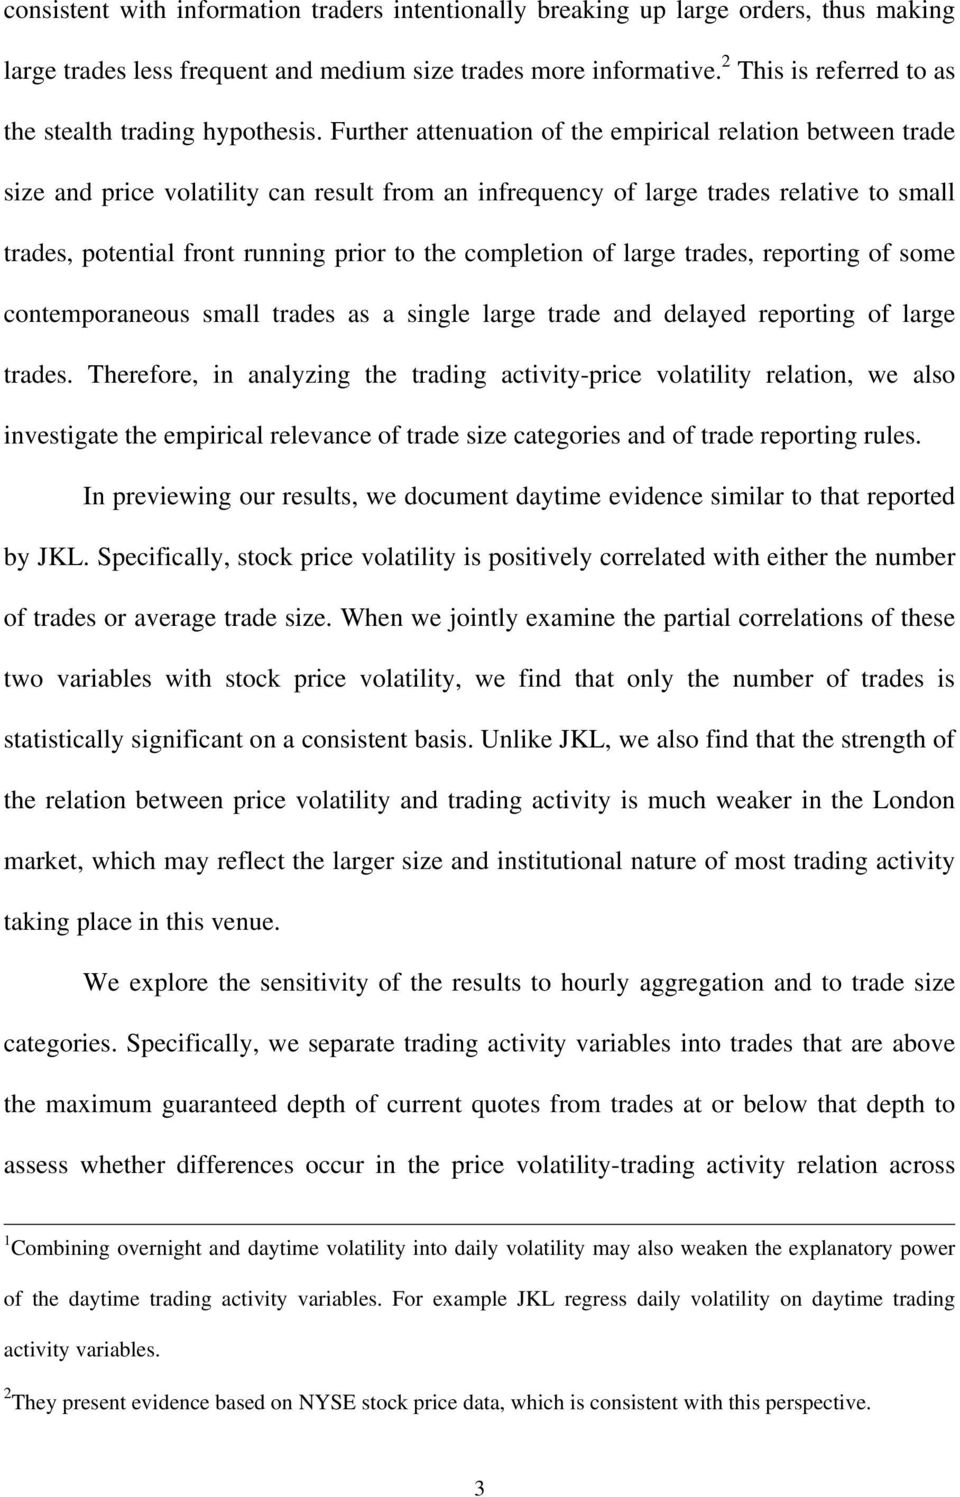 Further attenuation of the empirical relation between trade size and price volatility can result from an infrequency of large trades relative to small trades, potential front running prior to the